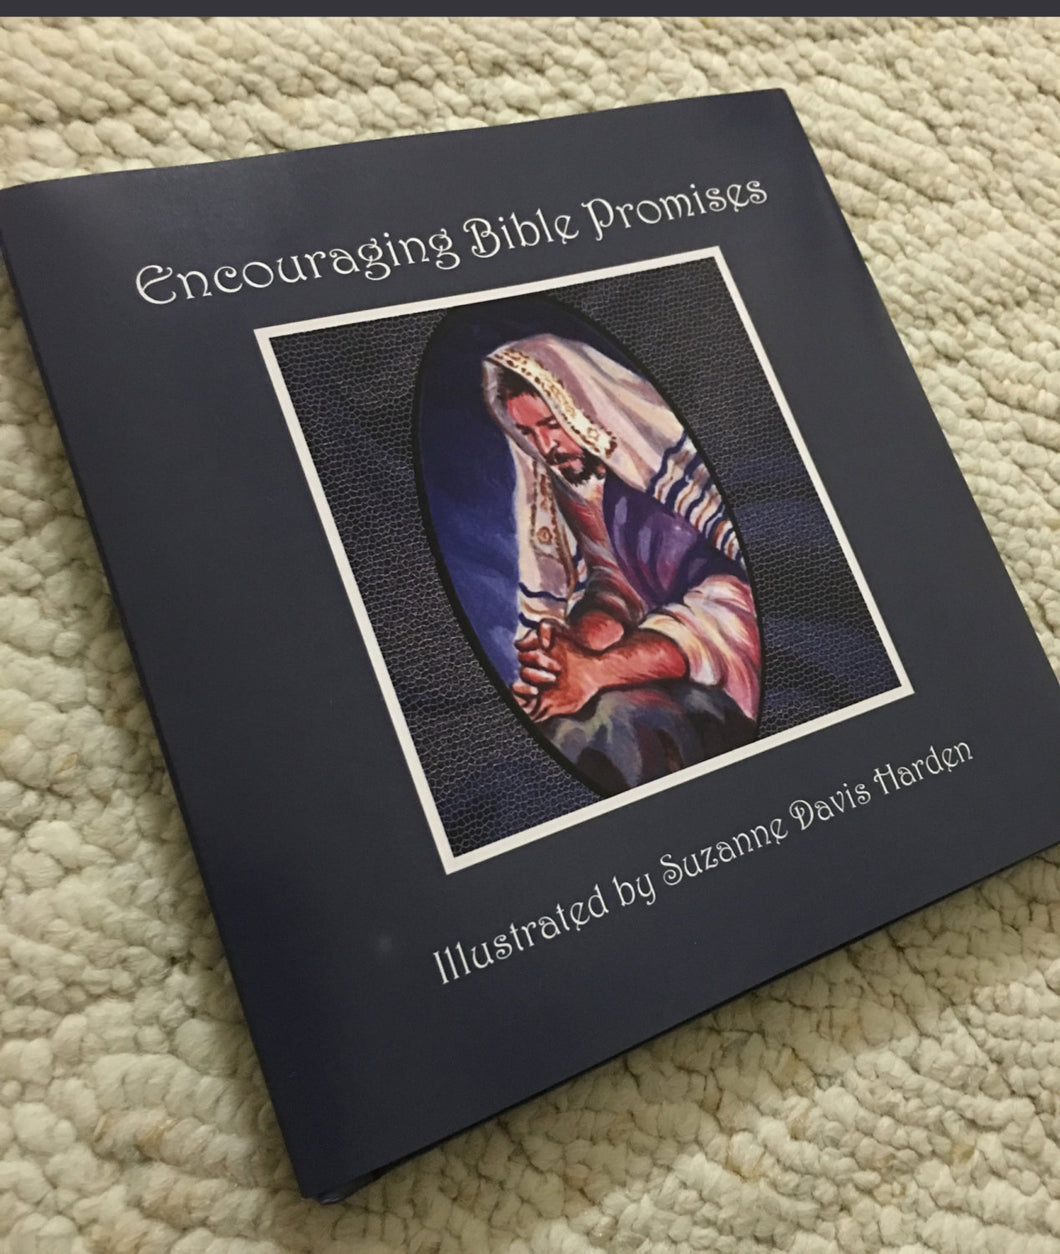 The Encouraging Bible Promise Book Illustrated by Suzanne Davis Harden